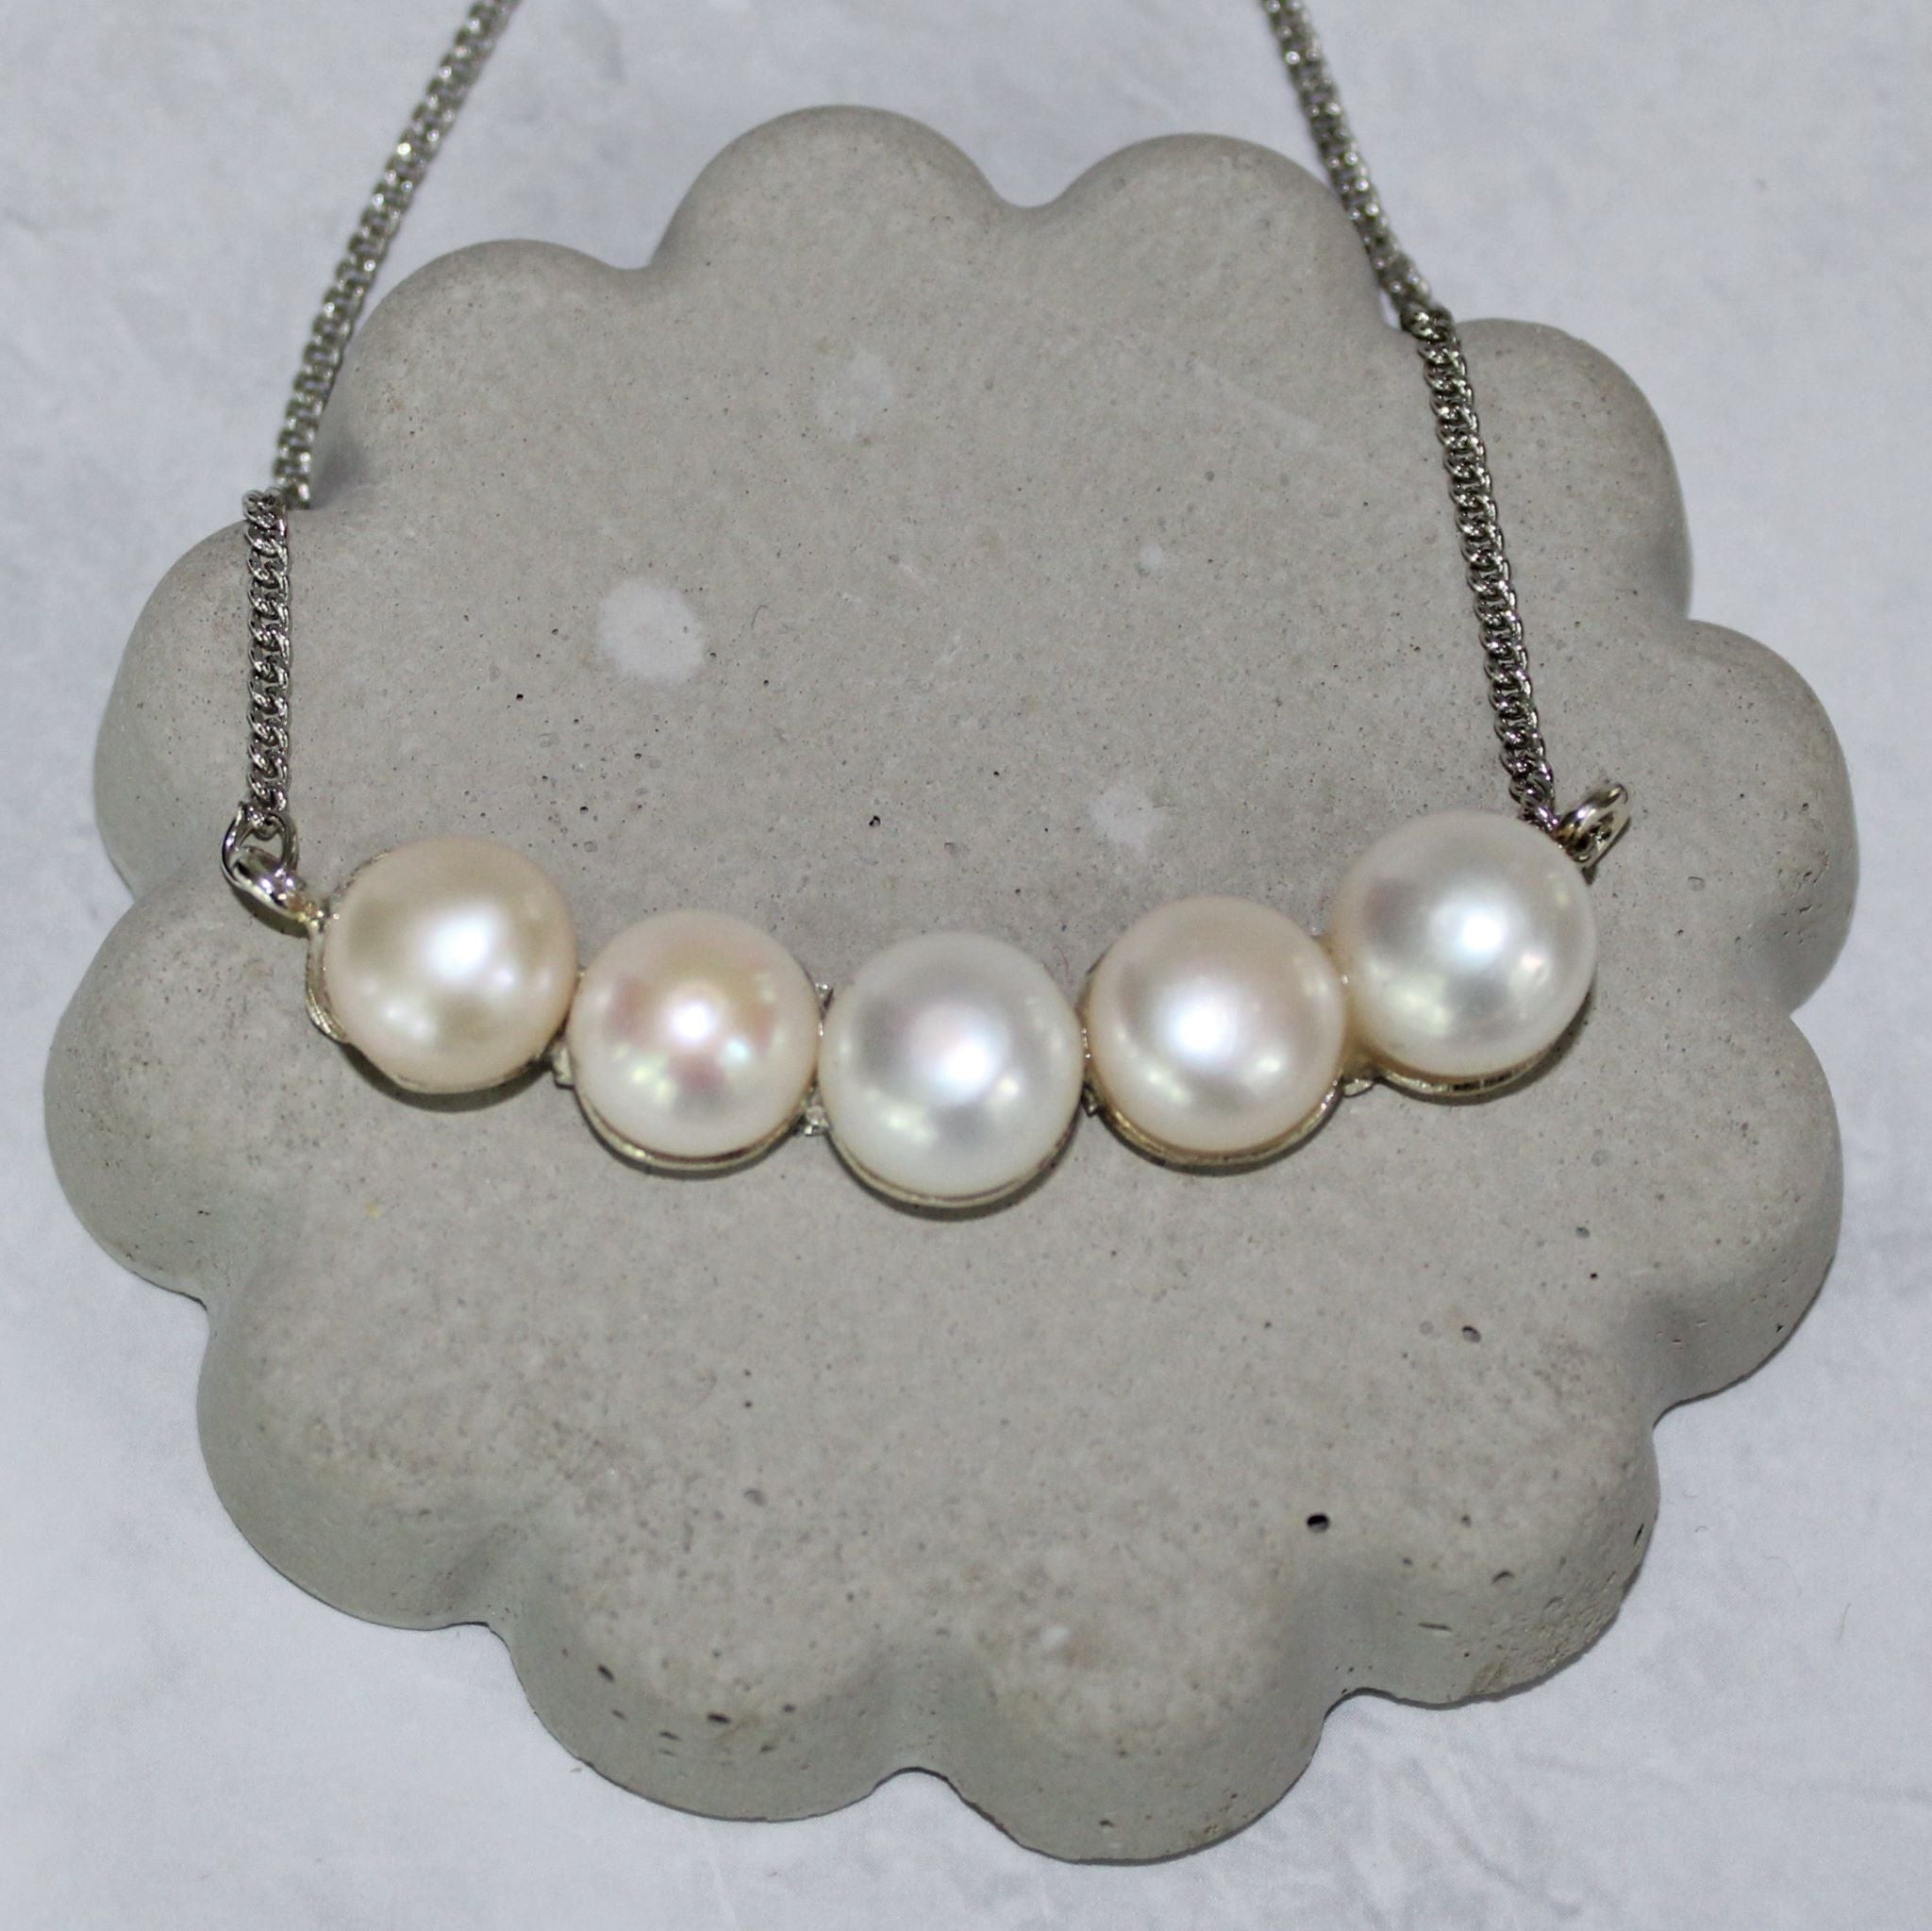 Five Pearl necklace